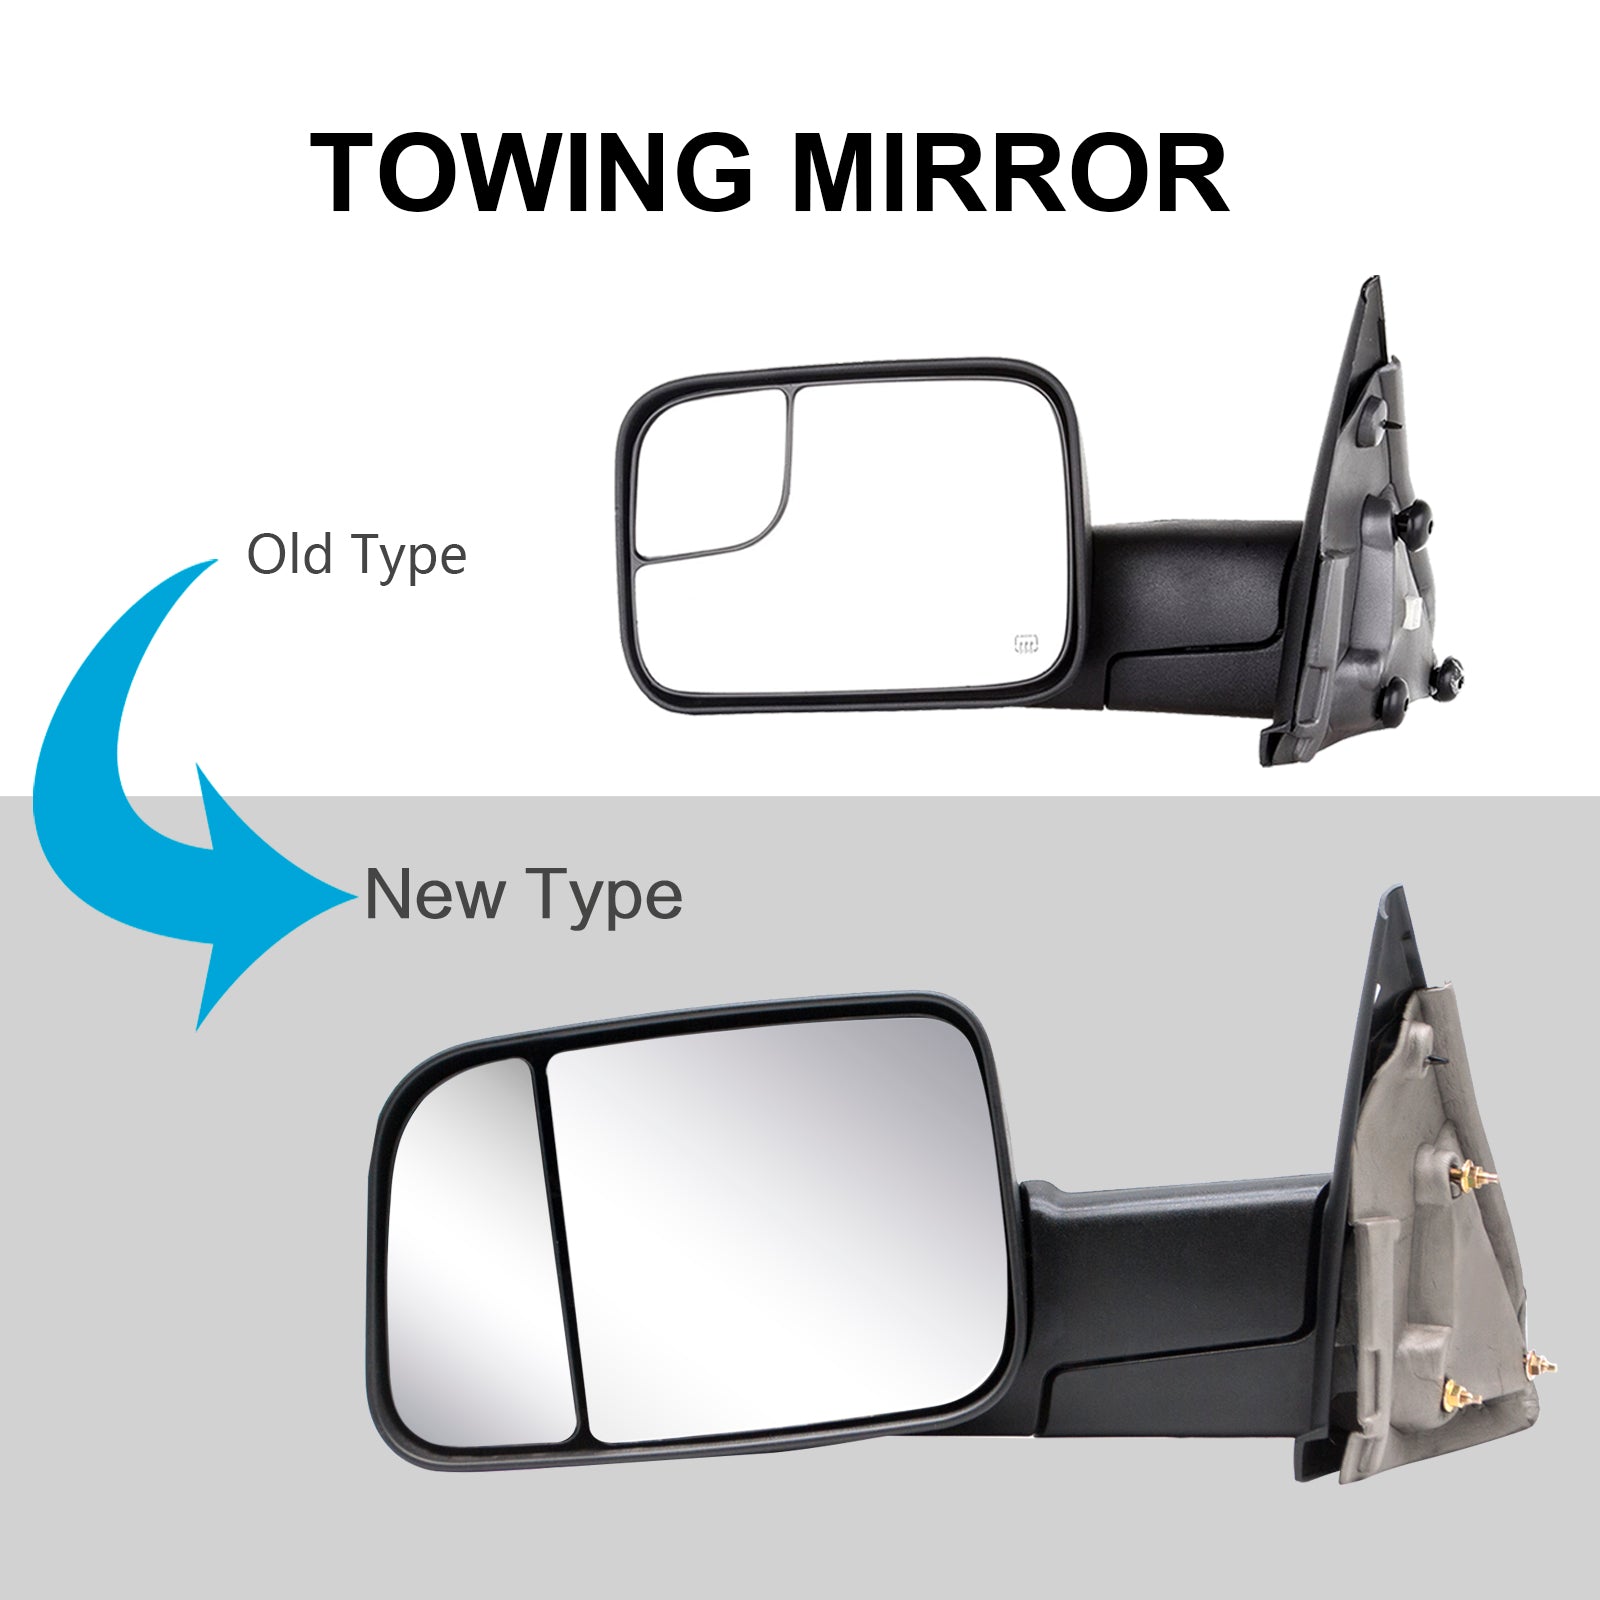 Towing Mirrors for 2002-2008 Dodge Ram 1500, 2003-2009 Dodge Ram 2500/3500, Pickup Truck Manual Folding and Flipping Black Housing 8B